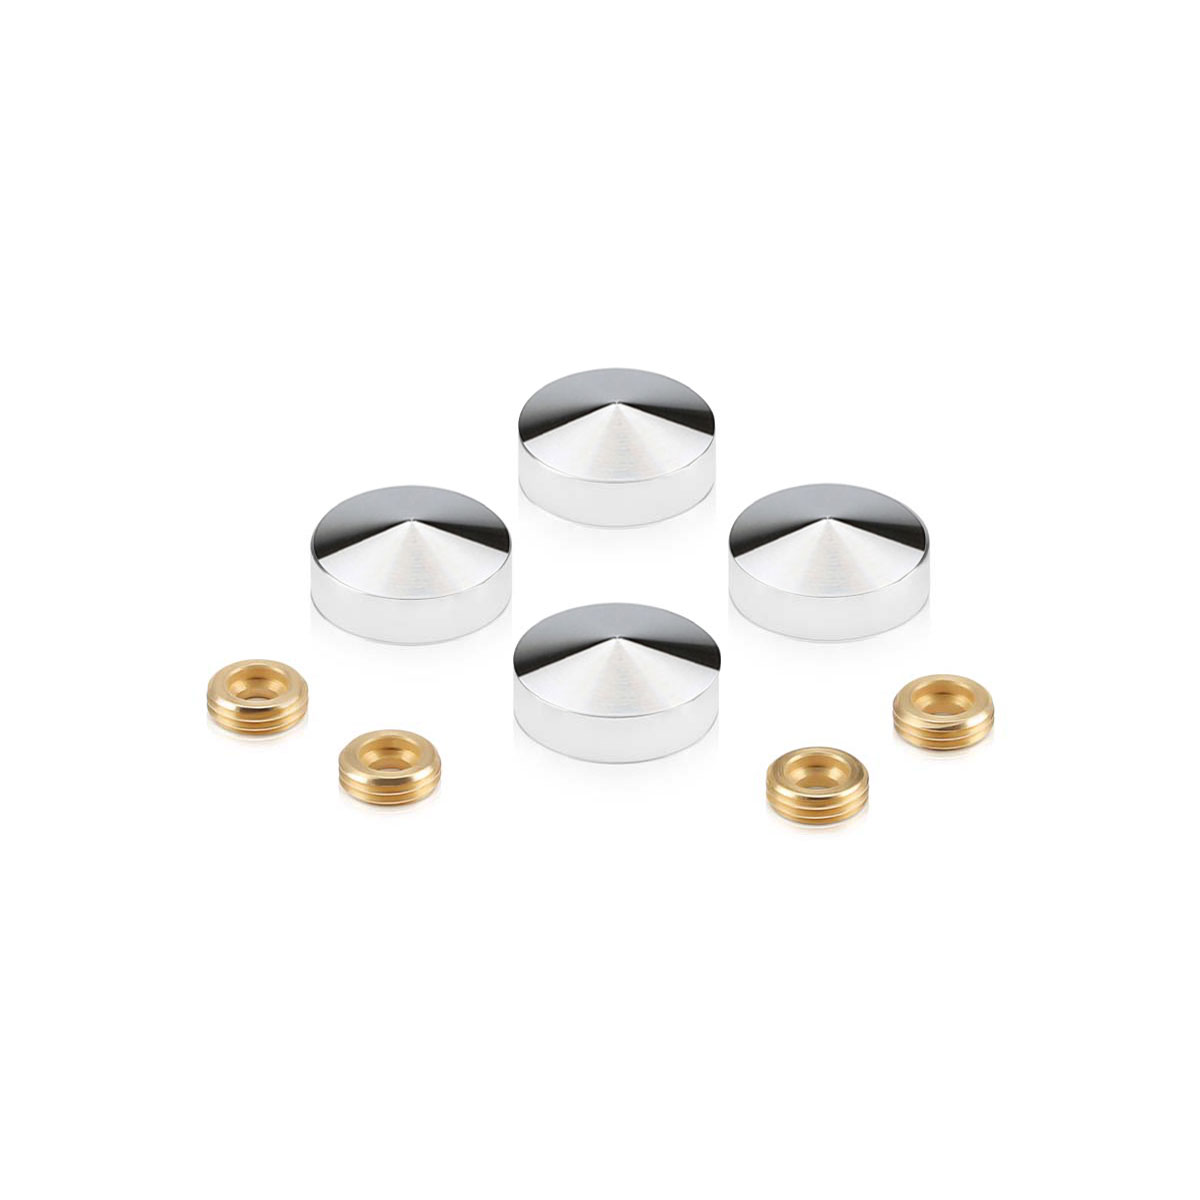 Set of Conical Screw Cover Diameter 13/16'', Satin Brushed Stainless Steel Finish (Indoor Use Only)